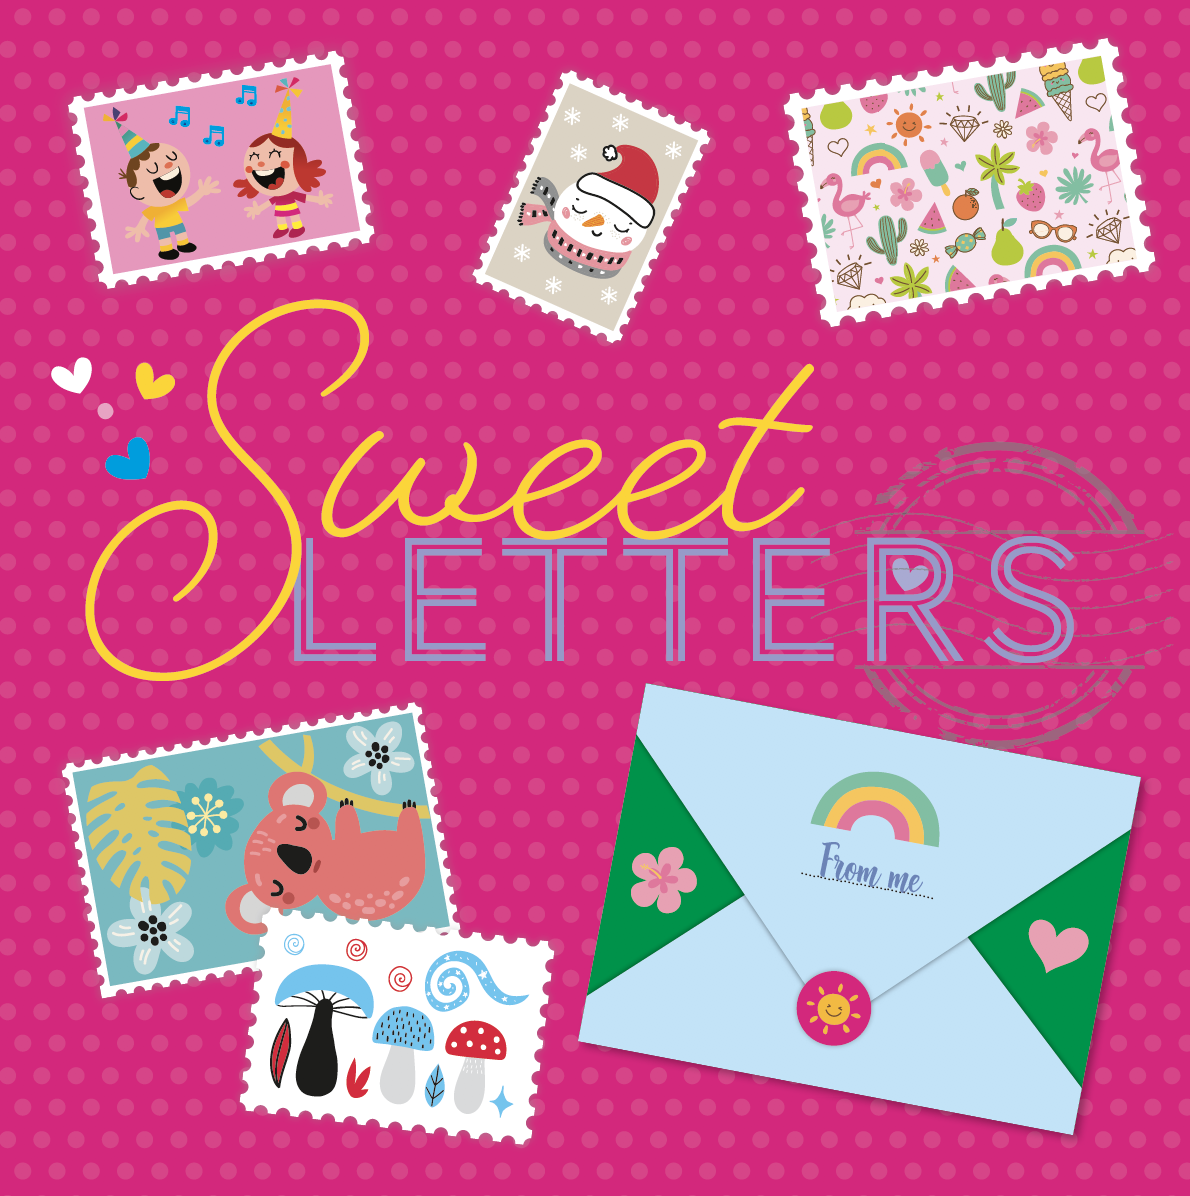 Sweet Letters - cover 1